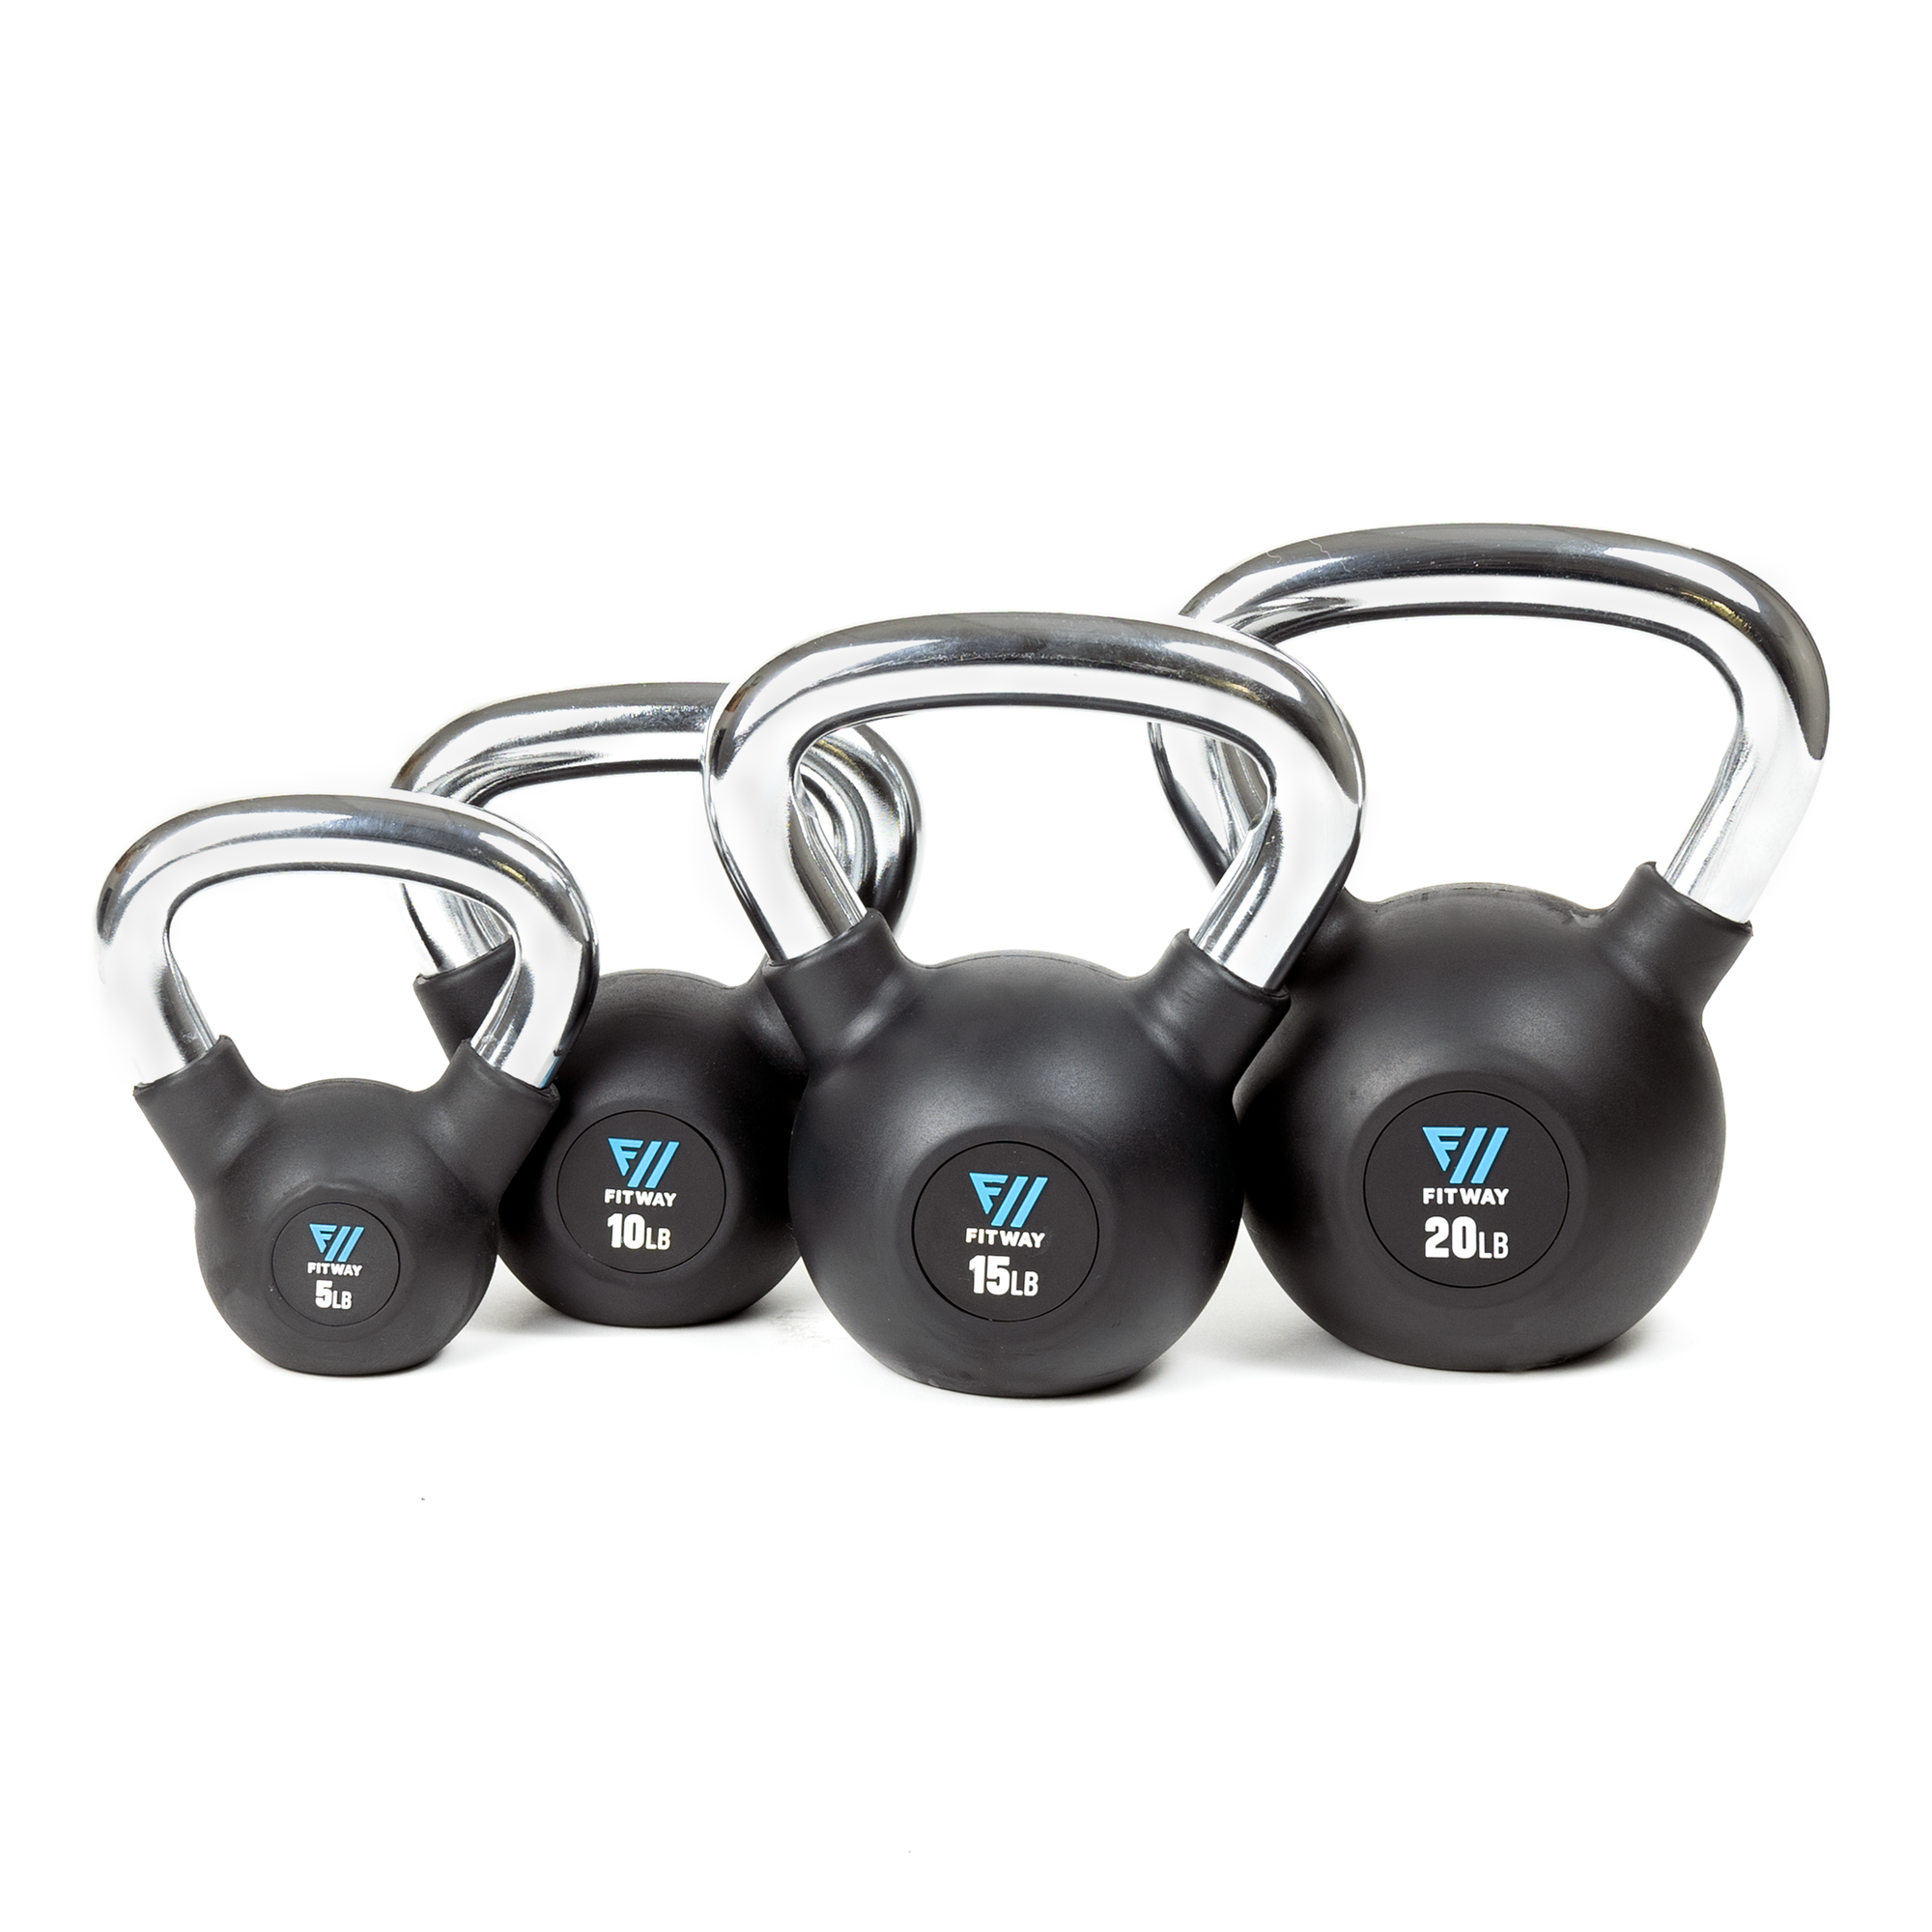 FitWay Equip. Rubber Coated 20lb Kettlebell